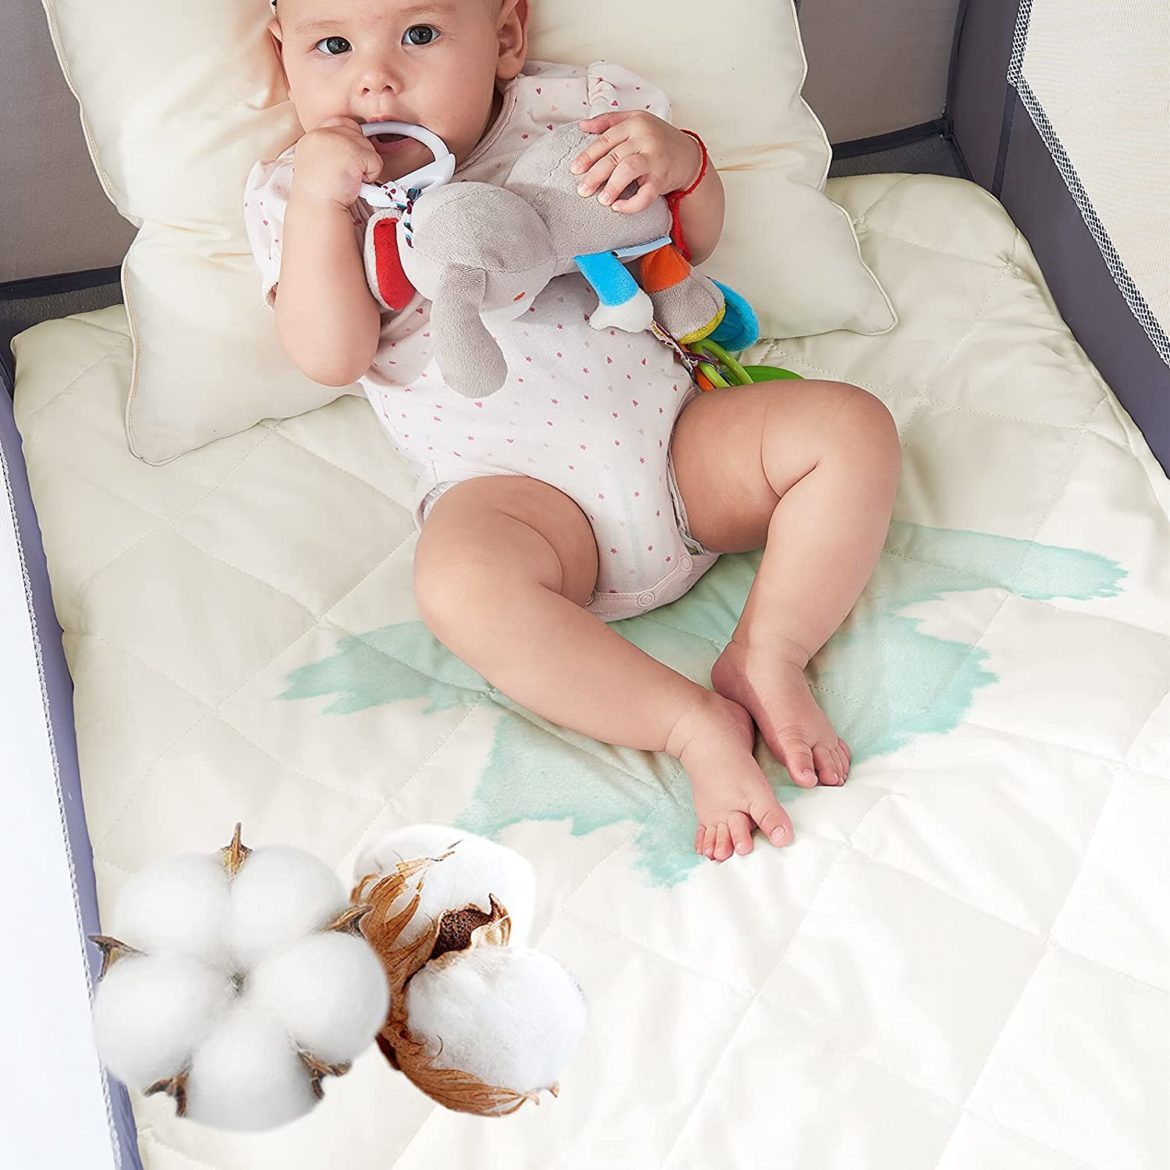 What is the use of a waterproof crib mattress pad?